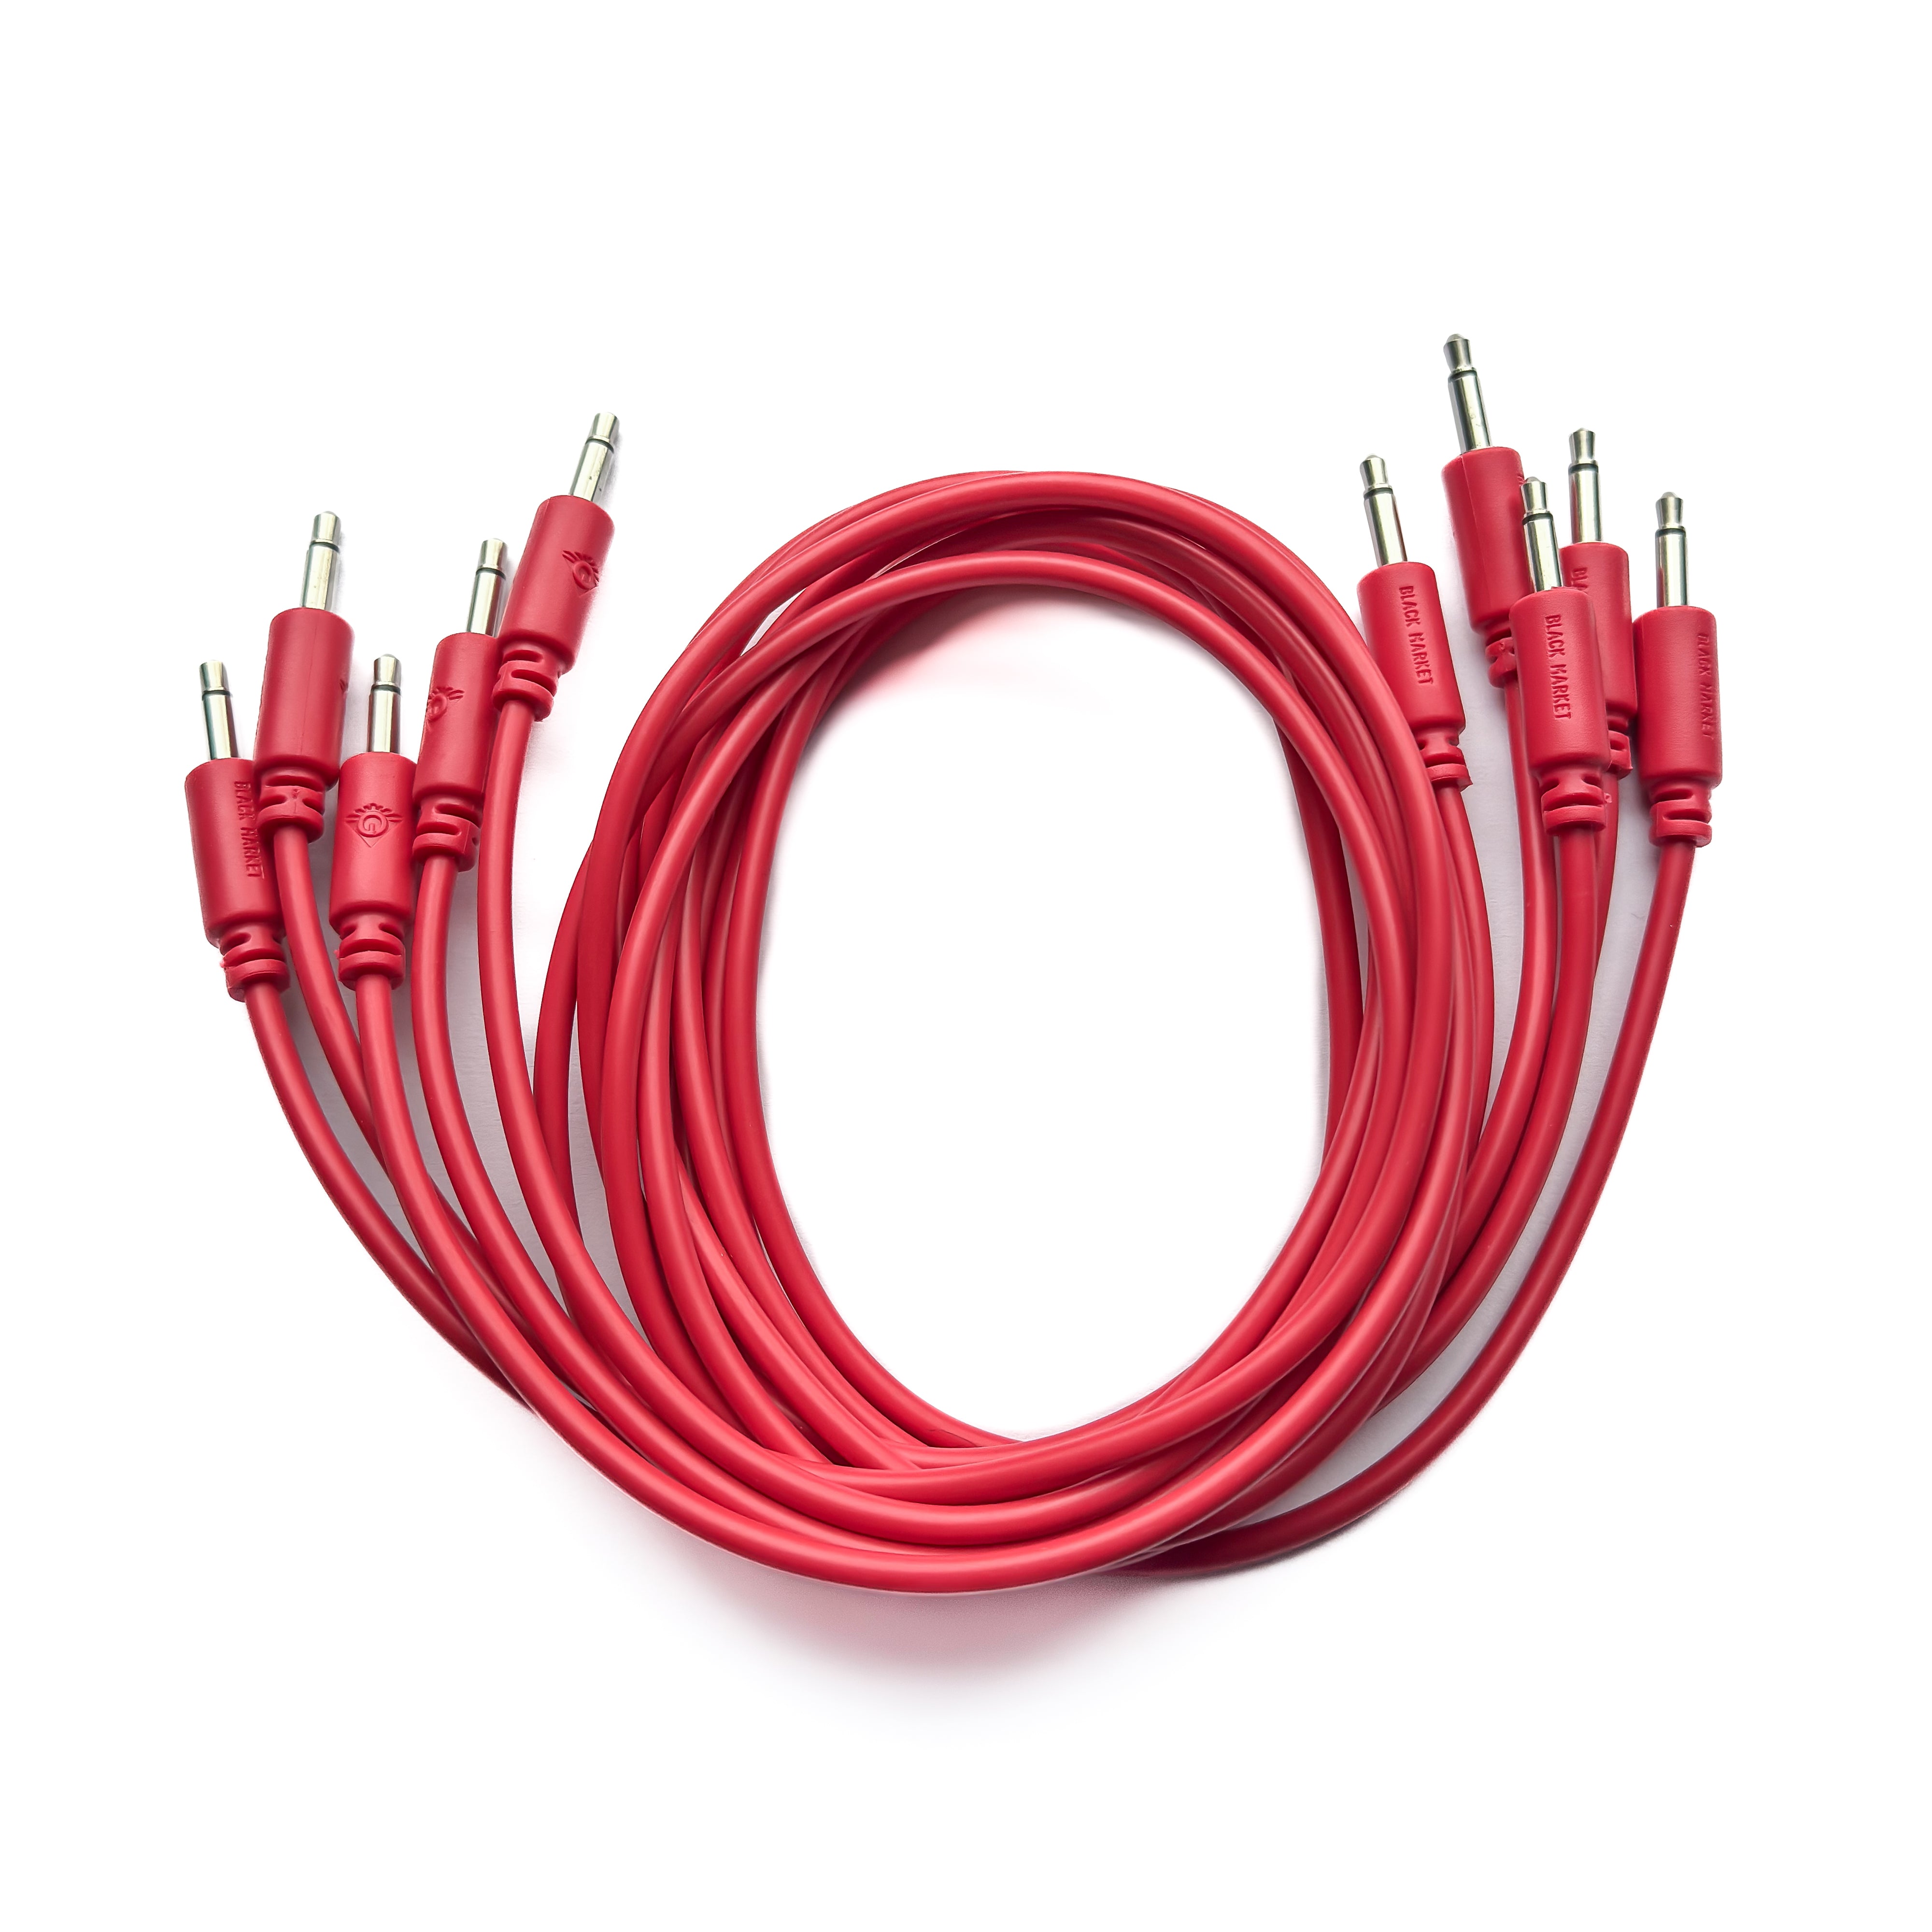 Black Market Modular 3.5mm Patch Cable 5-Pack - 75cm/30" - Red View 1